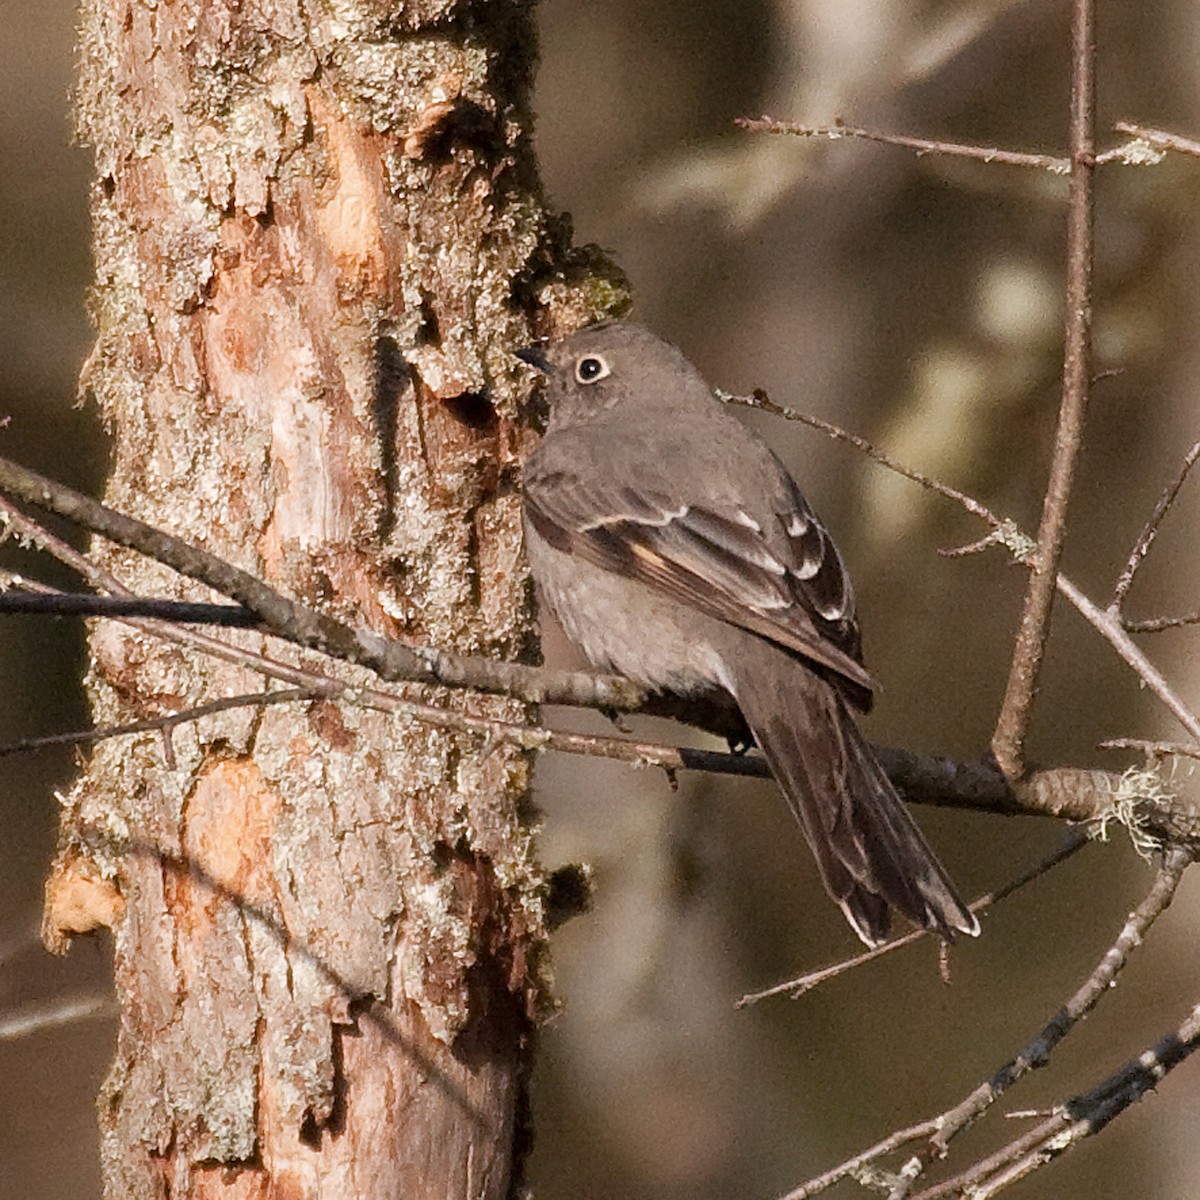 Townsend's Solitaire - Colin Clasen